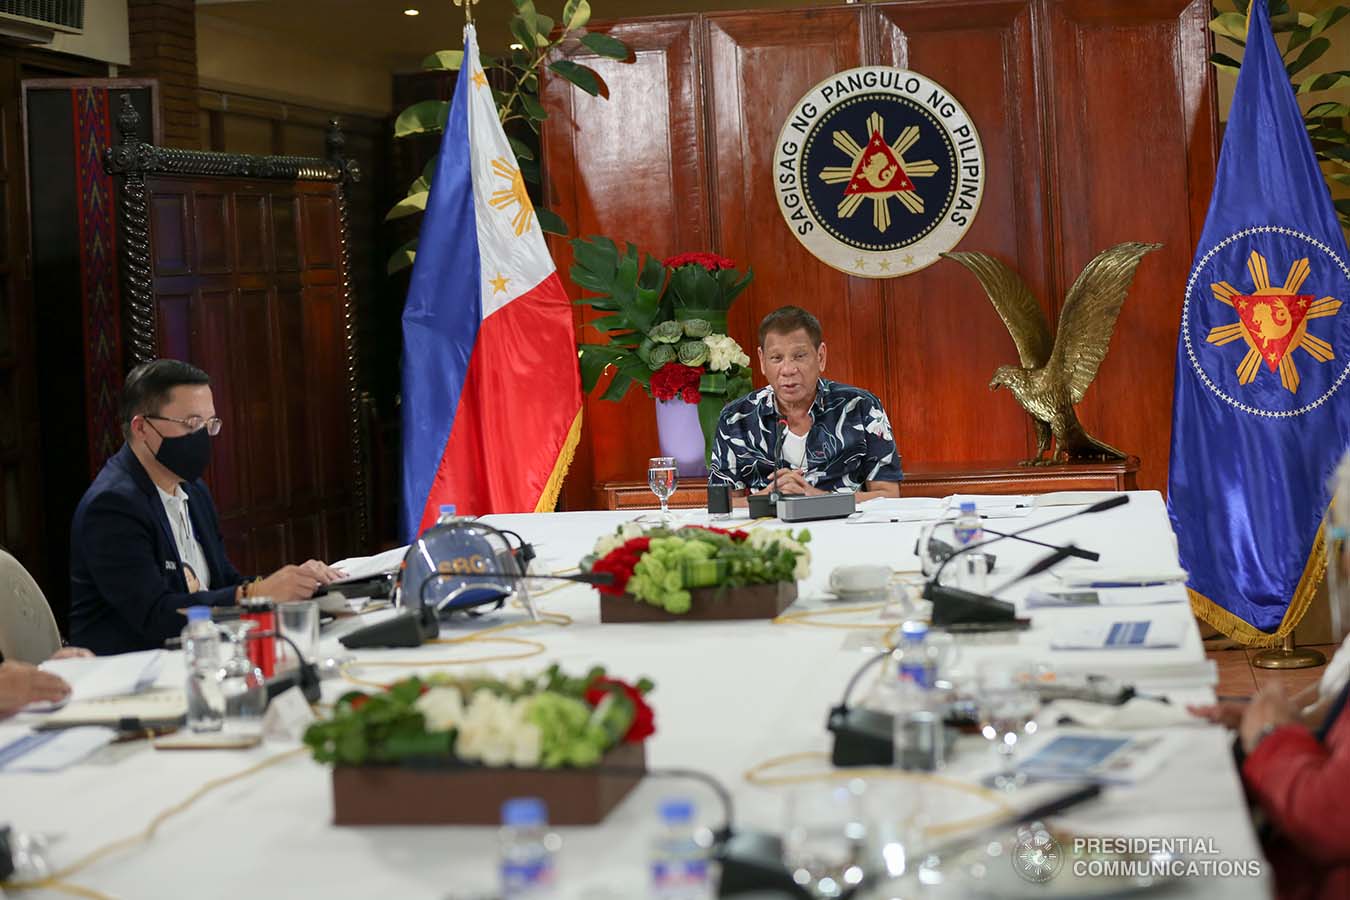 President Rodrigo Roa Duterte presides over a meeting with the Inter-Agency Task Force on the Emerging Infectious Diseases (IATF-EID) core members prior to his talk to the people at the Malago Clubhouse in Malacañang on October 5, 2020. SIMEON CELI/ PRESIDENTIAL PHOTO